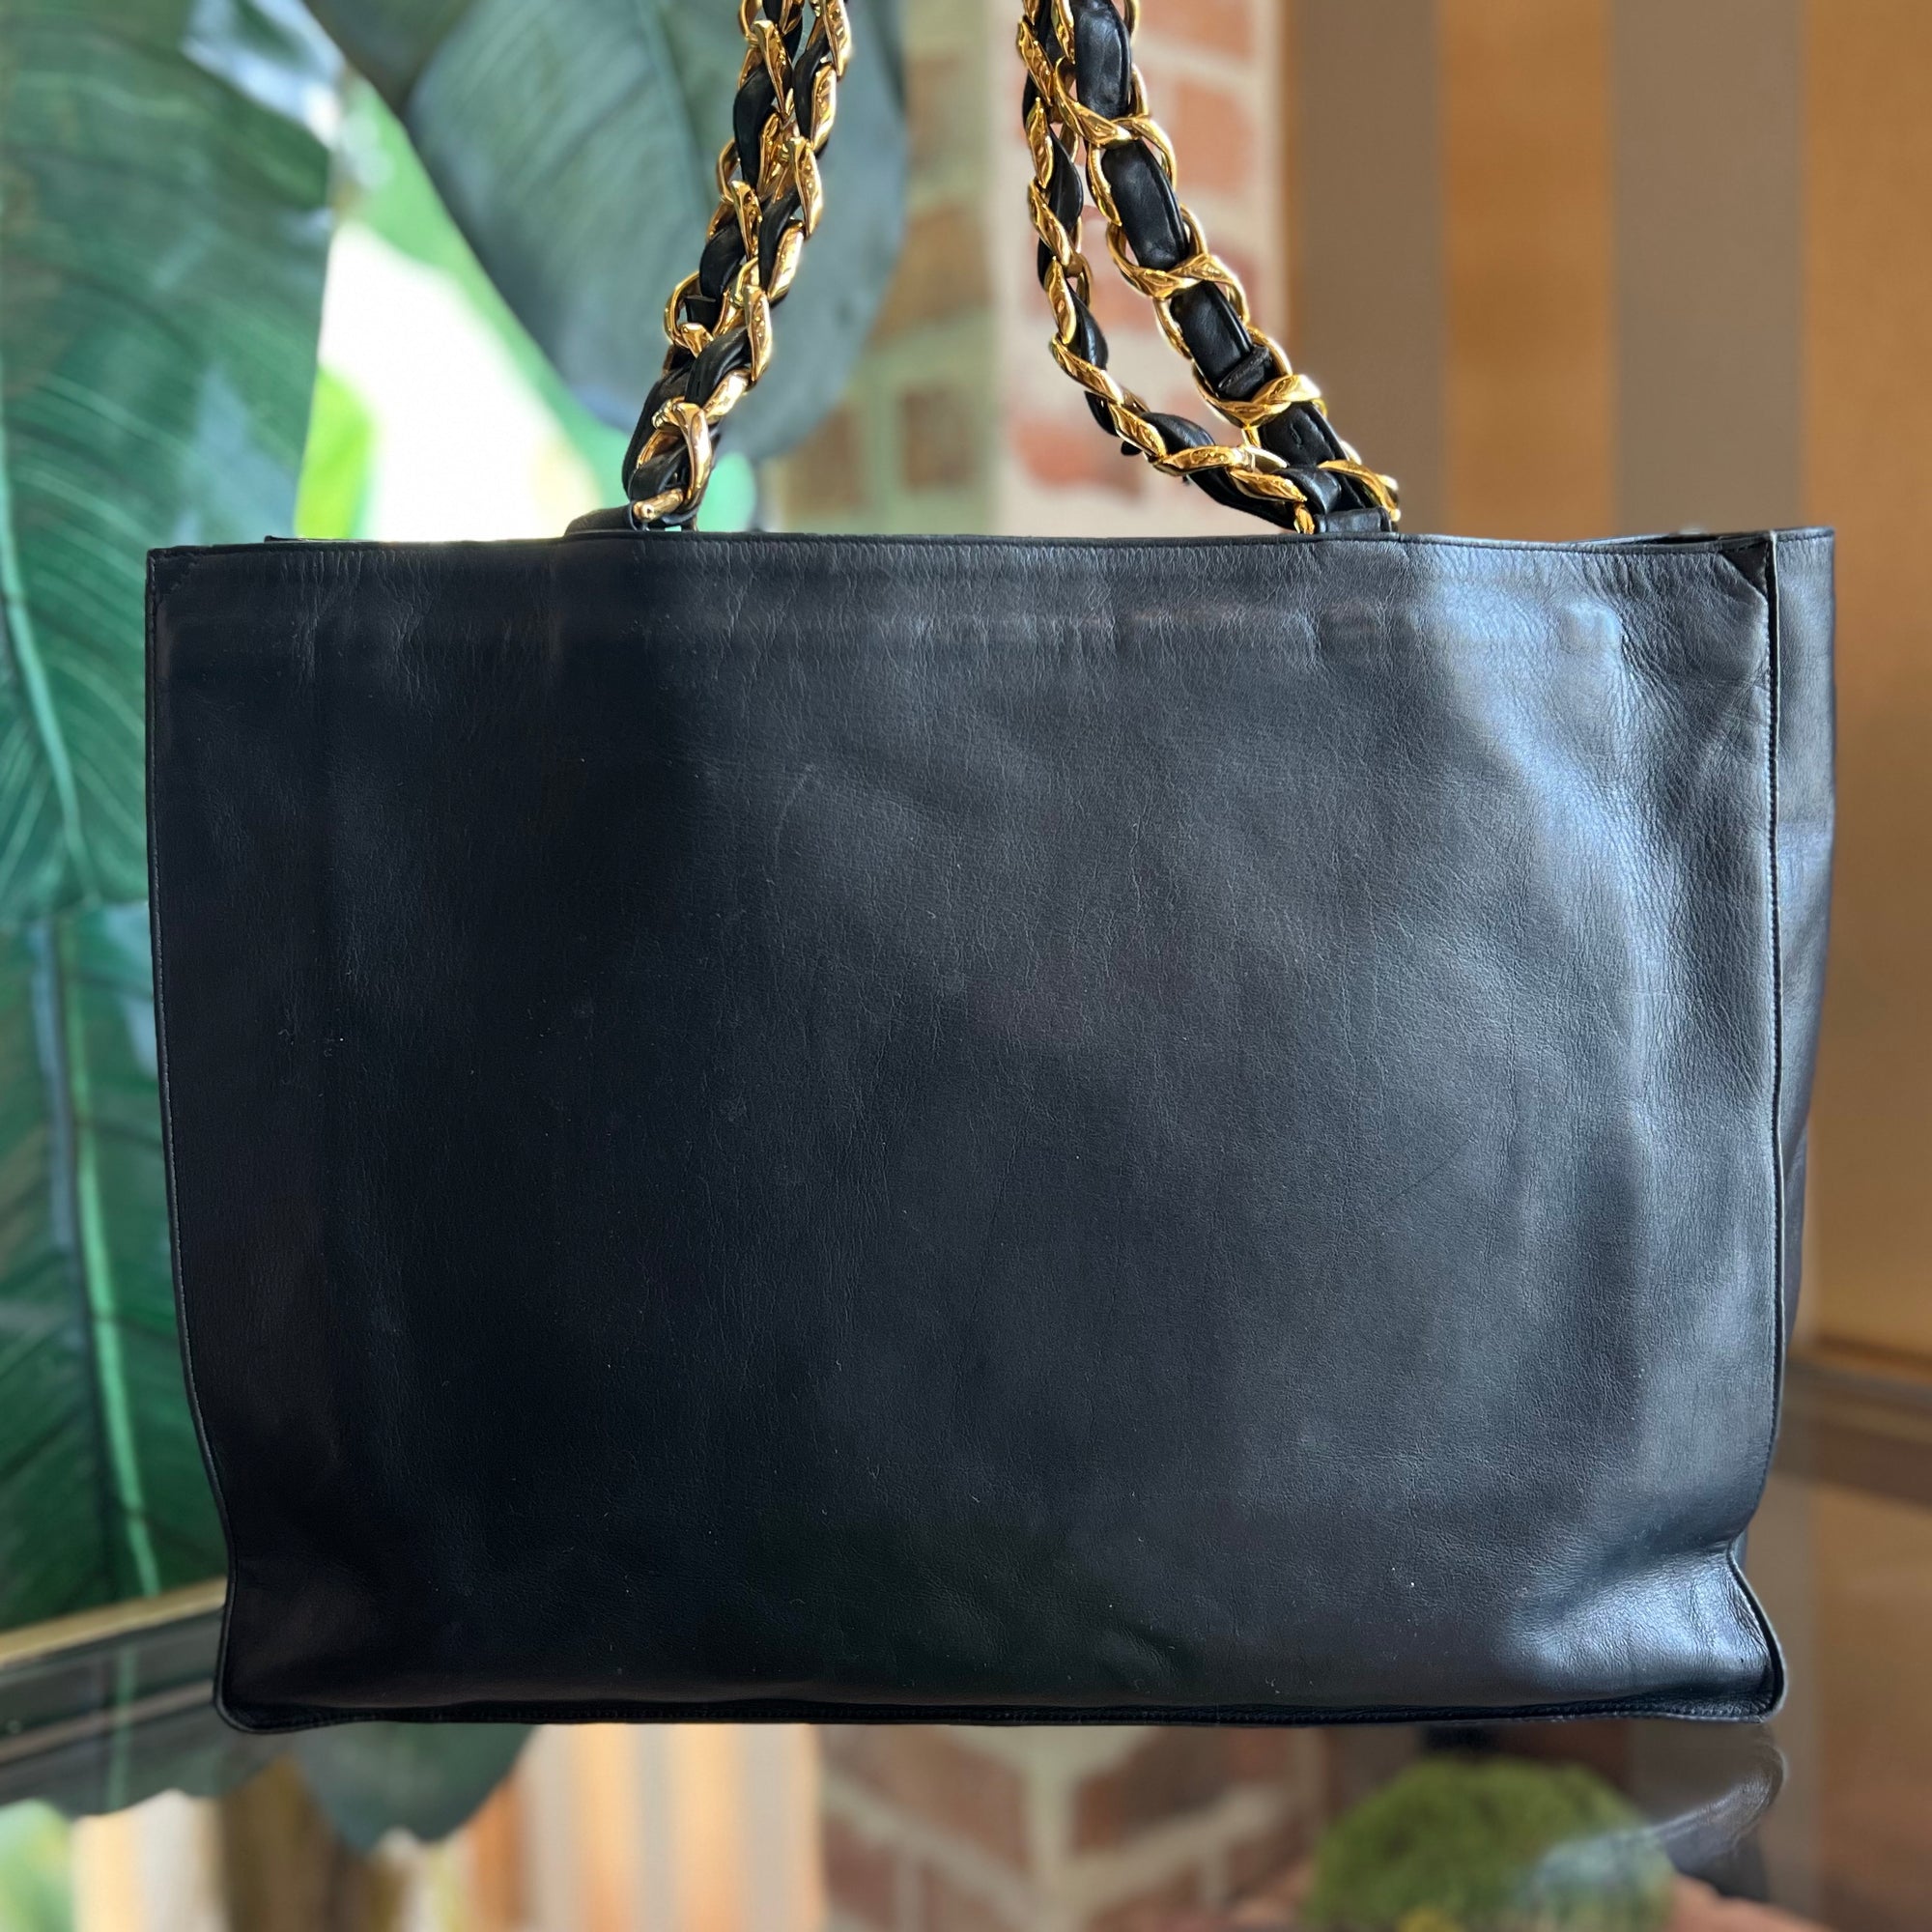 CHANEL Black Calfskin Leather Timeless Tote Bag TS